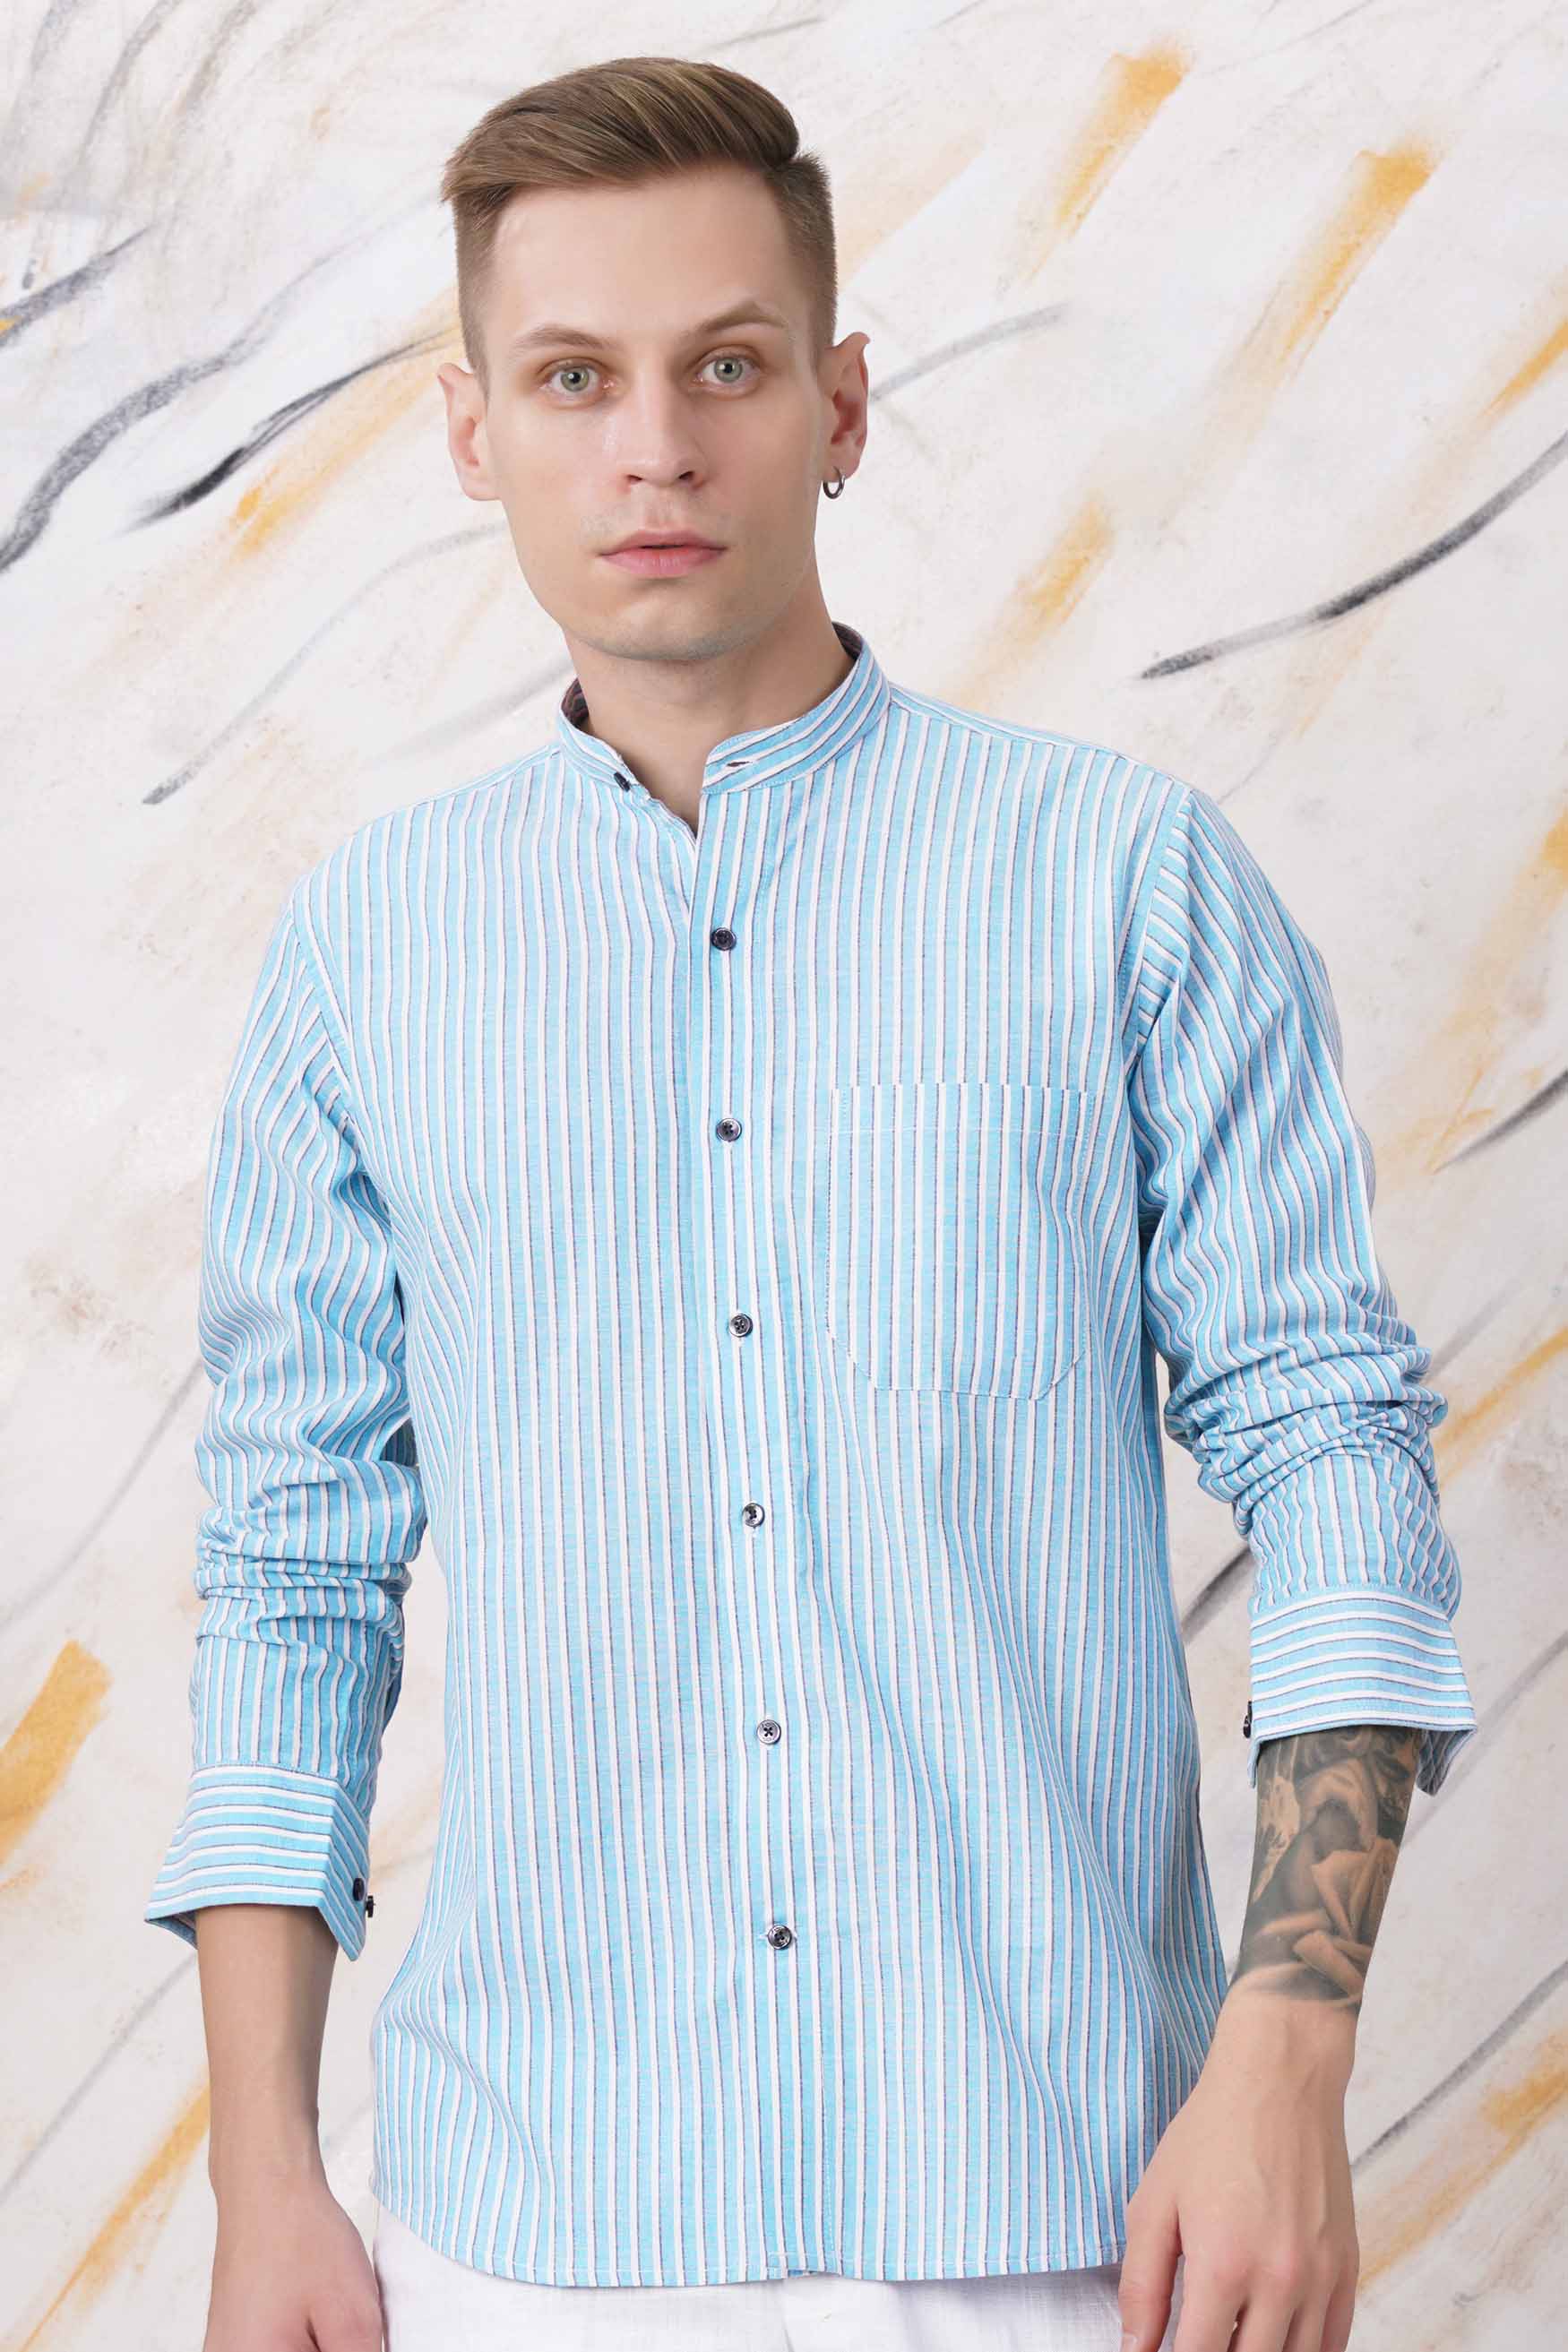 Blizzard Blue and White Striped Luxurious Linen Shirt 11482-M-BLE-38, 11482-M-BLE-H-38, 11482-M-BLE-39, 11482-M-BLE-H-39, 11482-M-BLE-40, 11482-M-BLE-H-40, 11482-M-BLE-42, 11482-M-BLE-H-42, 11482-M-BLE-44, 11482-M-BLE-H-44, 11482-M-BLE-46, 11482-M-BLE-H-46, 11482-M-BLE-48, 11482-M-BLE-H-48, 11482-M-BLE-50, 11482-M-BLE-H-50, 11482-M-BLE-52, 11482-M-BLE-H-52